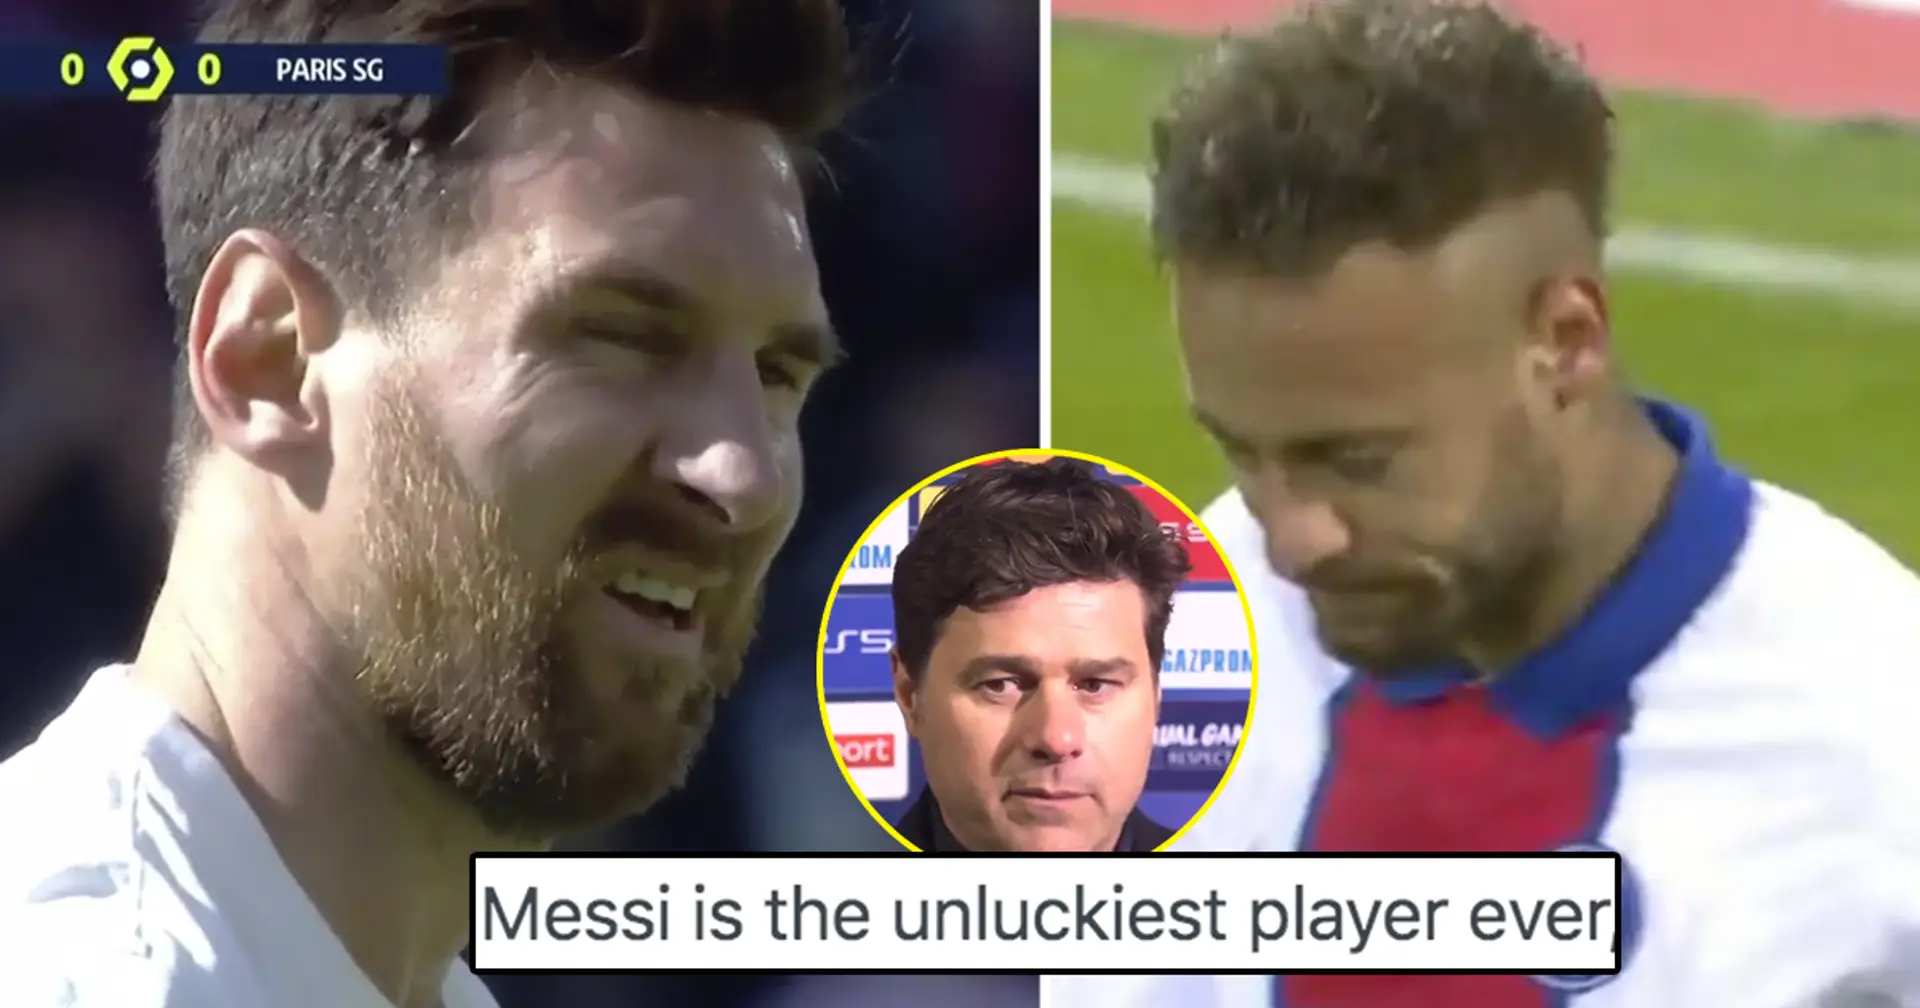 'He's about to go back to Barca': Global fans react as PSG lose despite splendid Messi performance